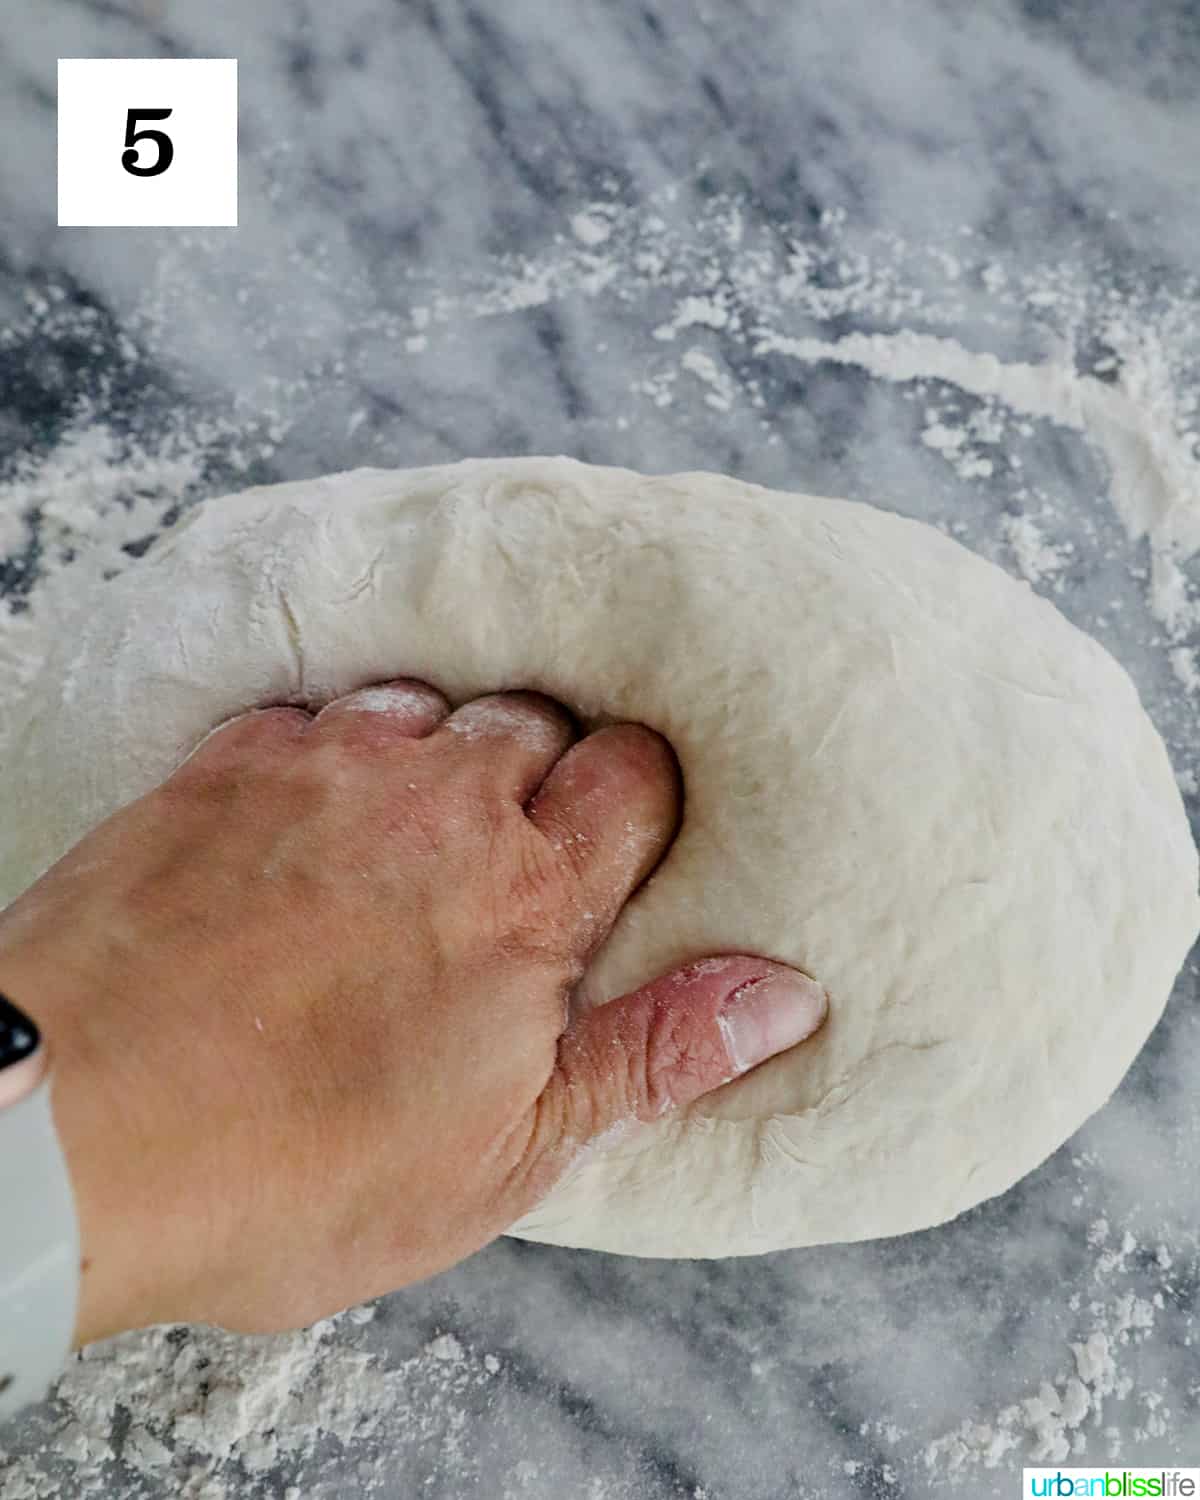 A hand kneading homemade French bread dough ball on a floured marble countertop.